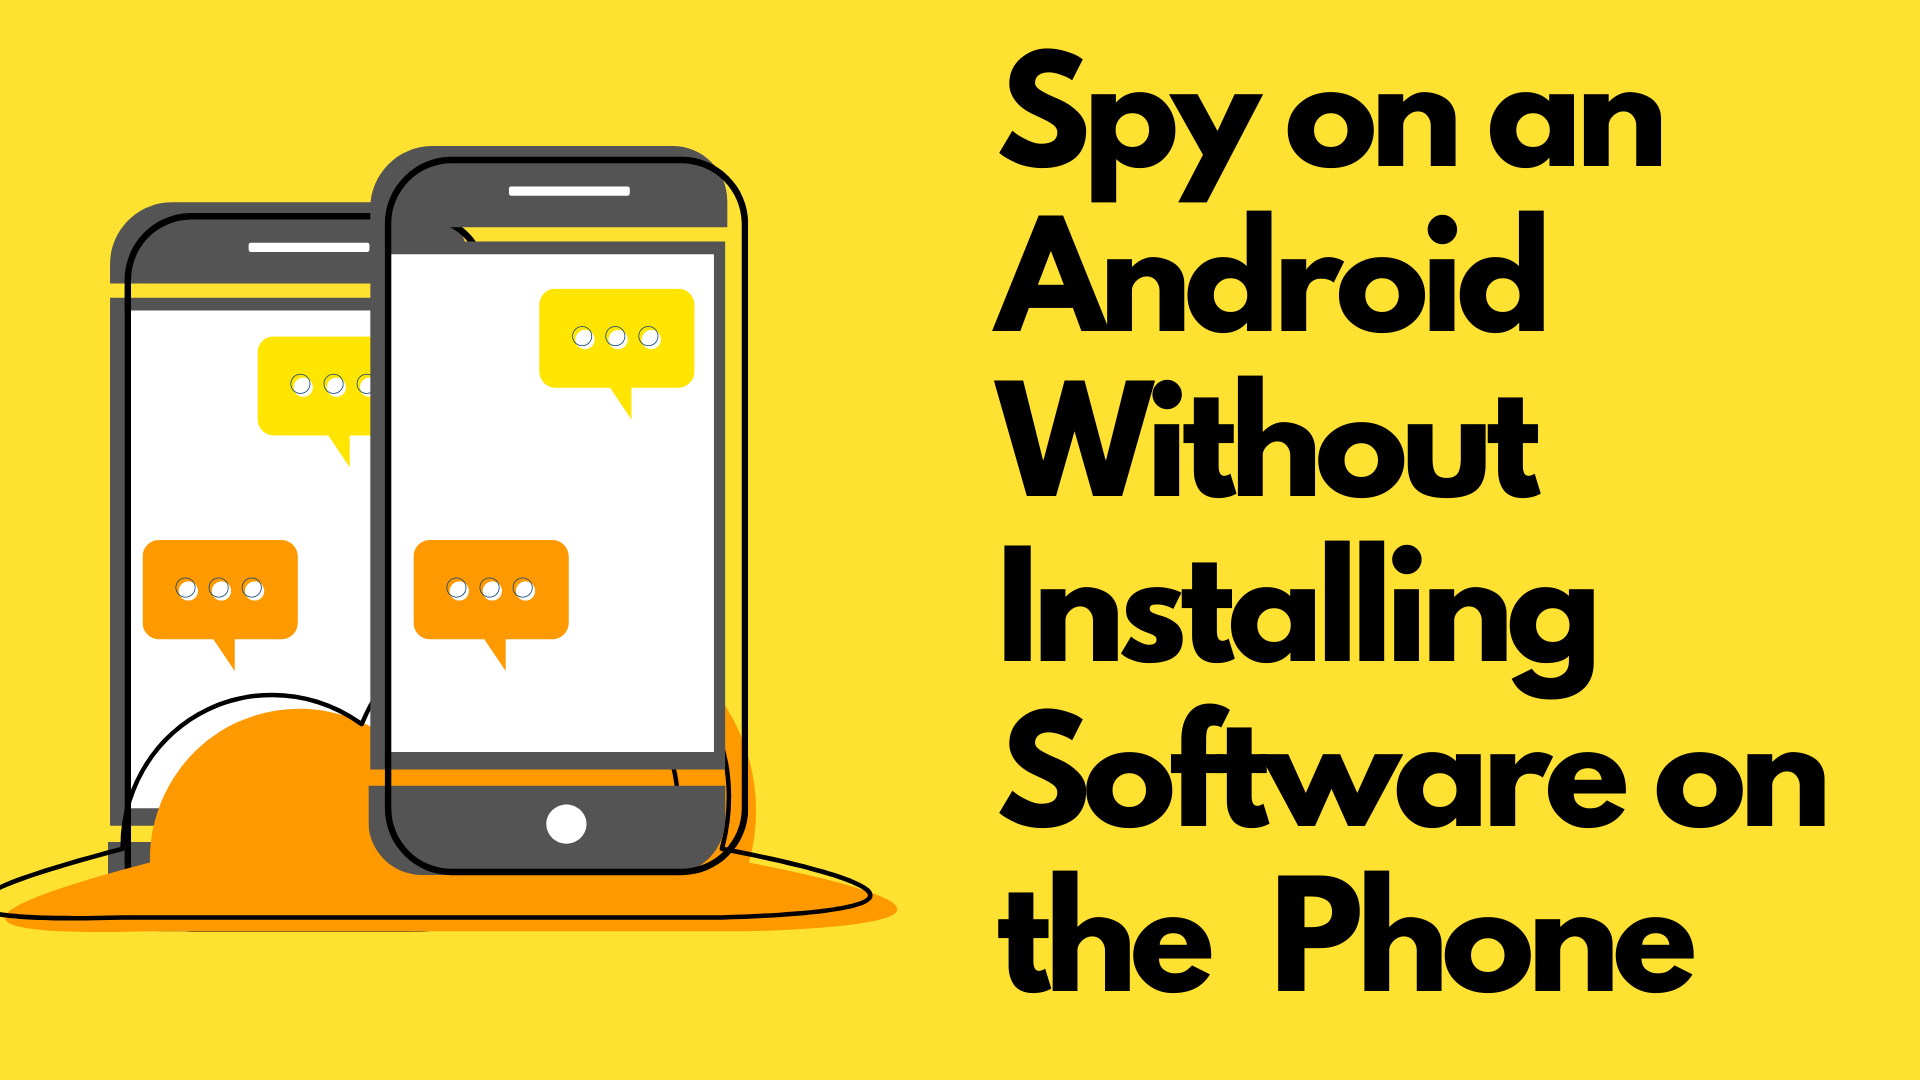 How Can I Spy on an Android Without Installing Software on the Target Phone?